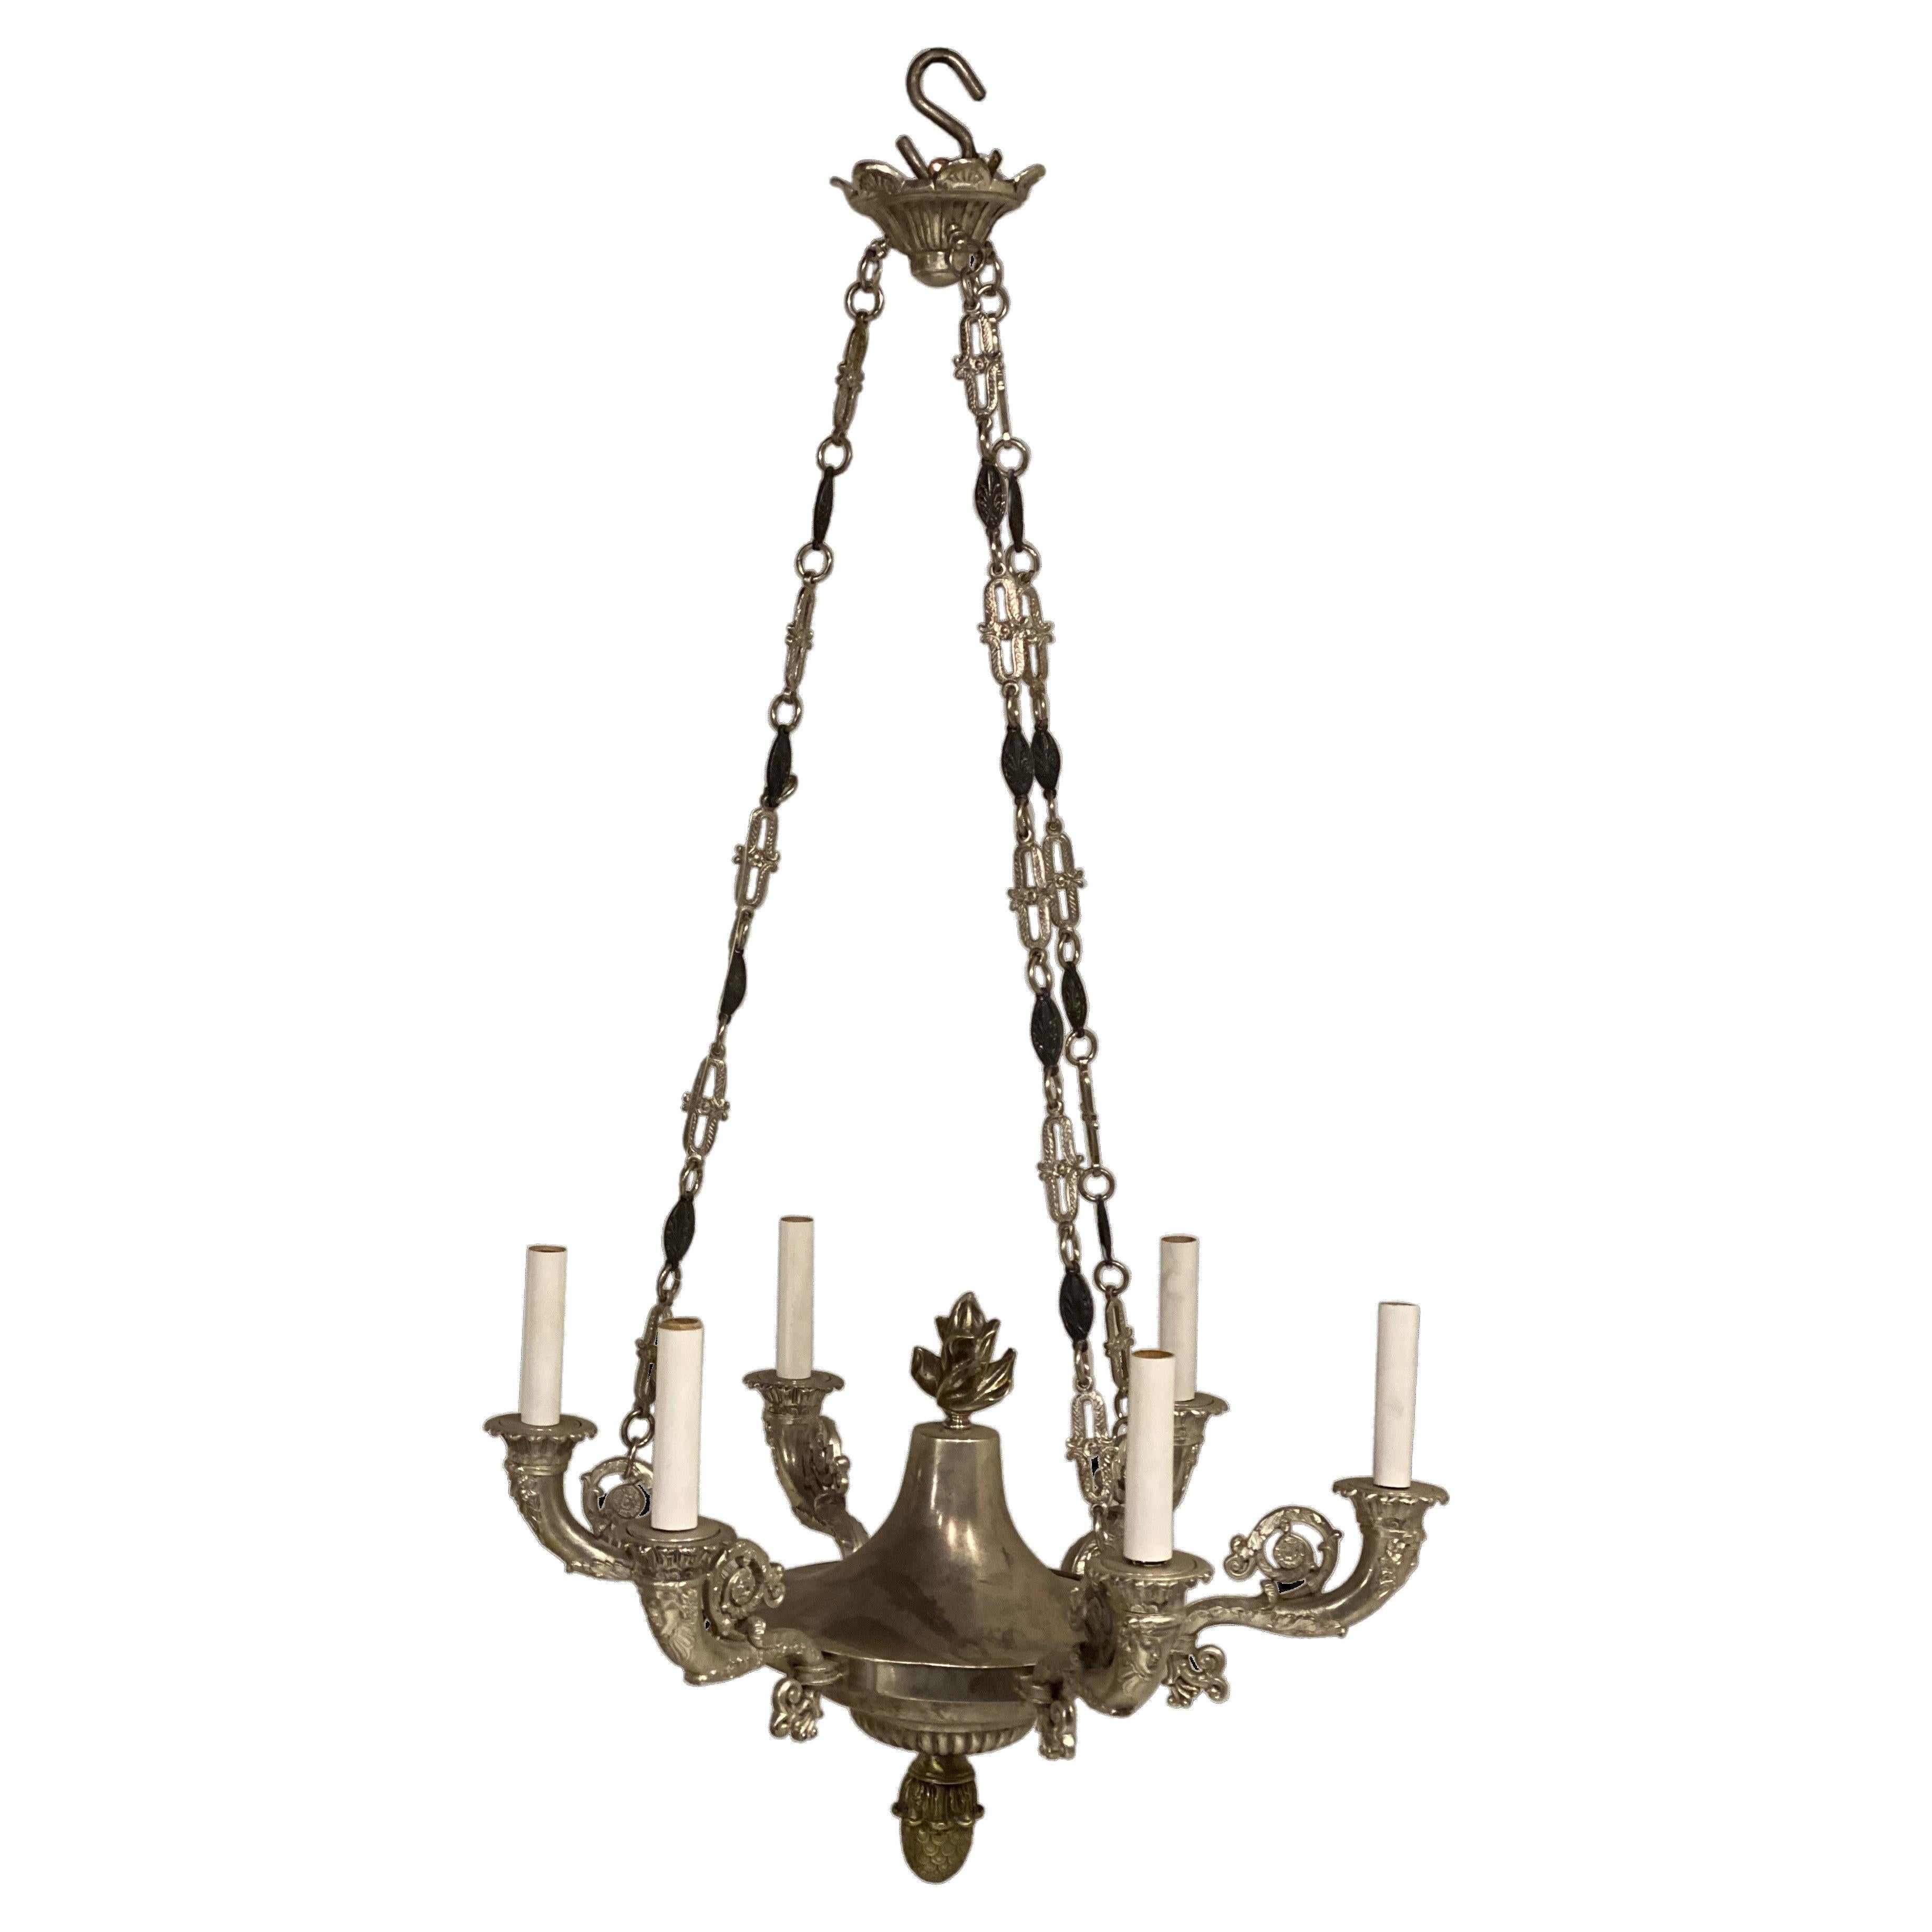 1930's French Empire Silver Plated Chandelier with 6 lights For Sale